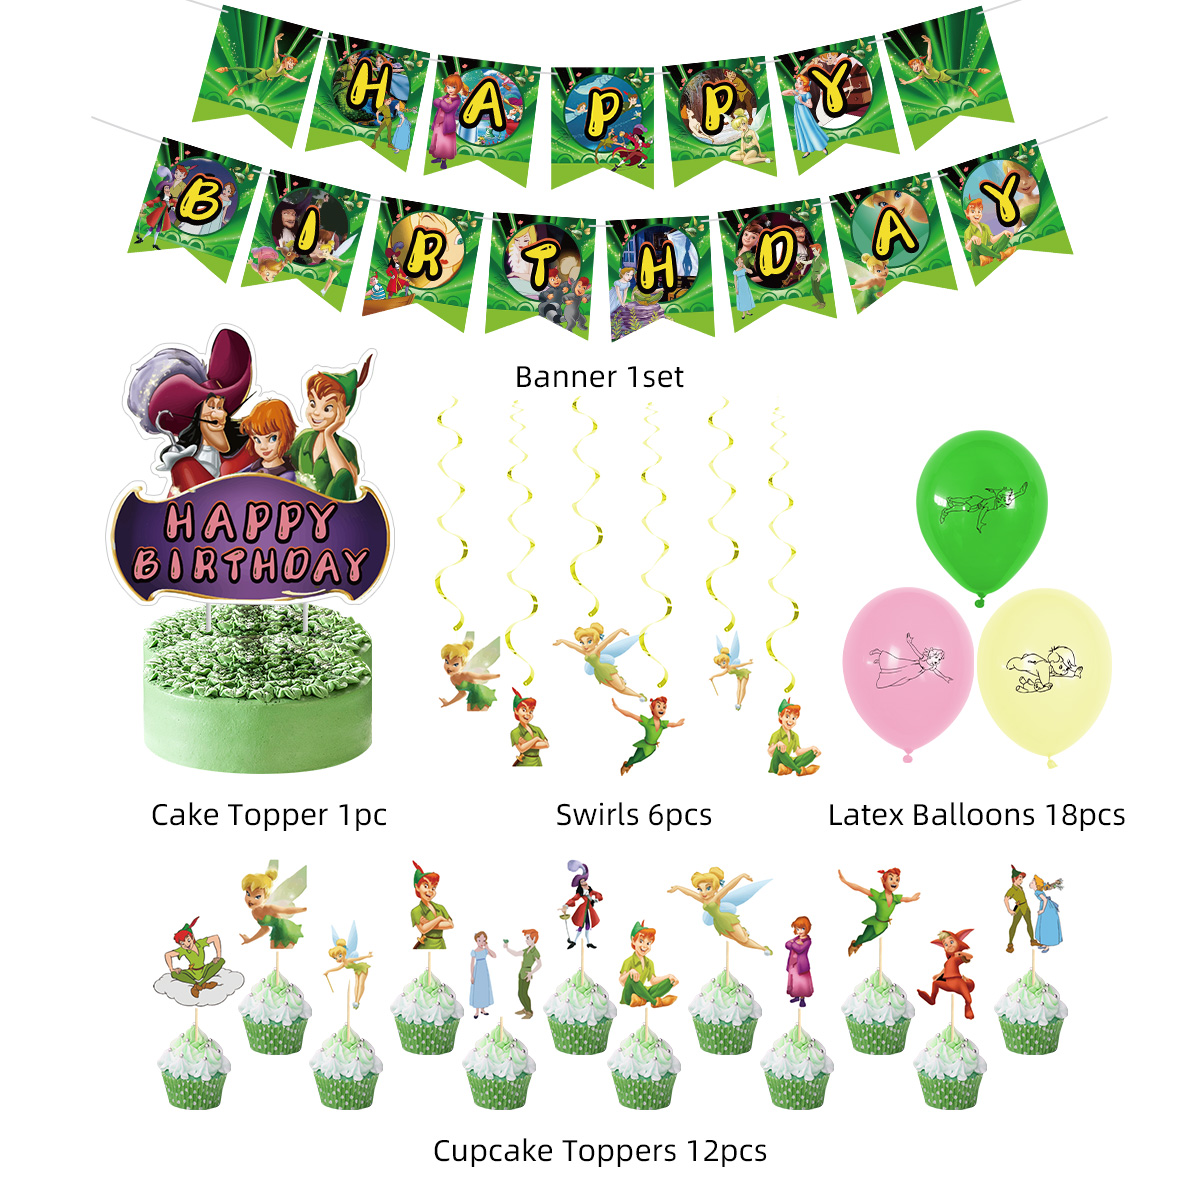 Peter Pan with Tinker bell party package